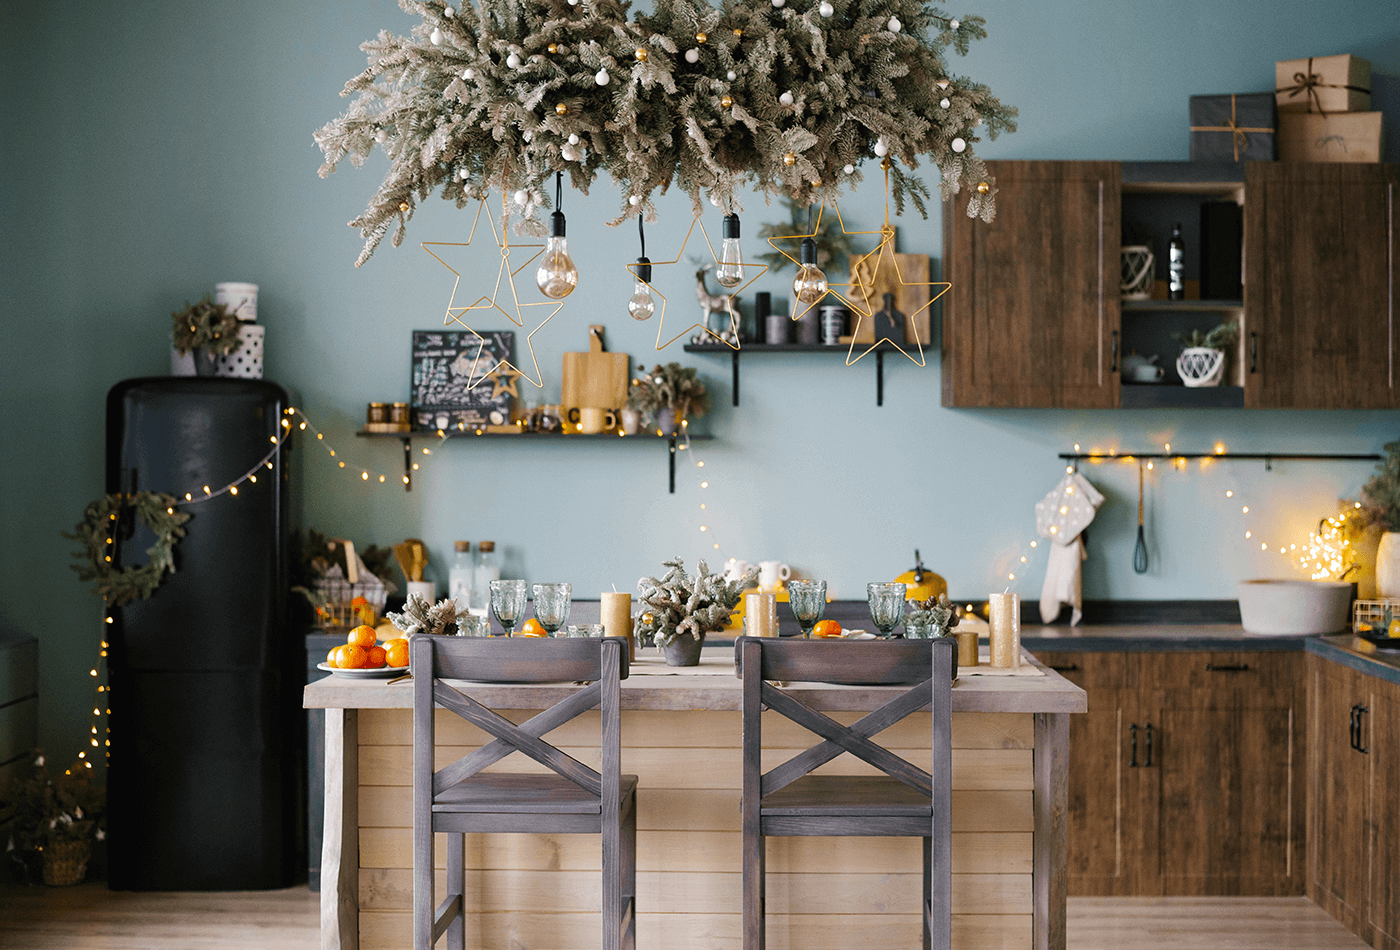 CHRISTMAS KITCHEN DECOR IN BLUE AND GOLD